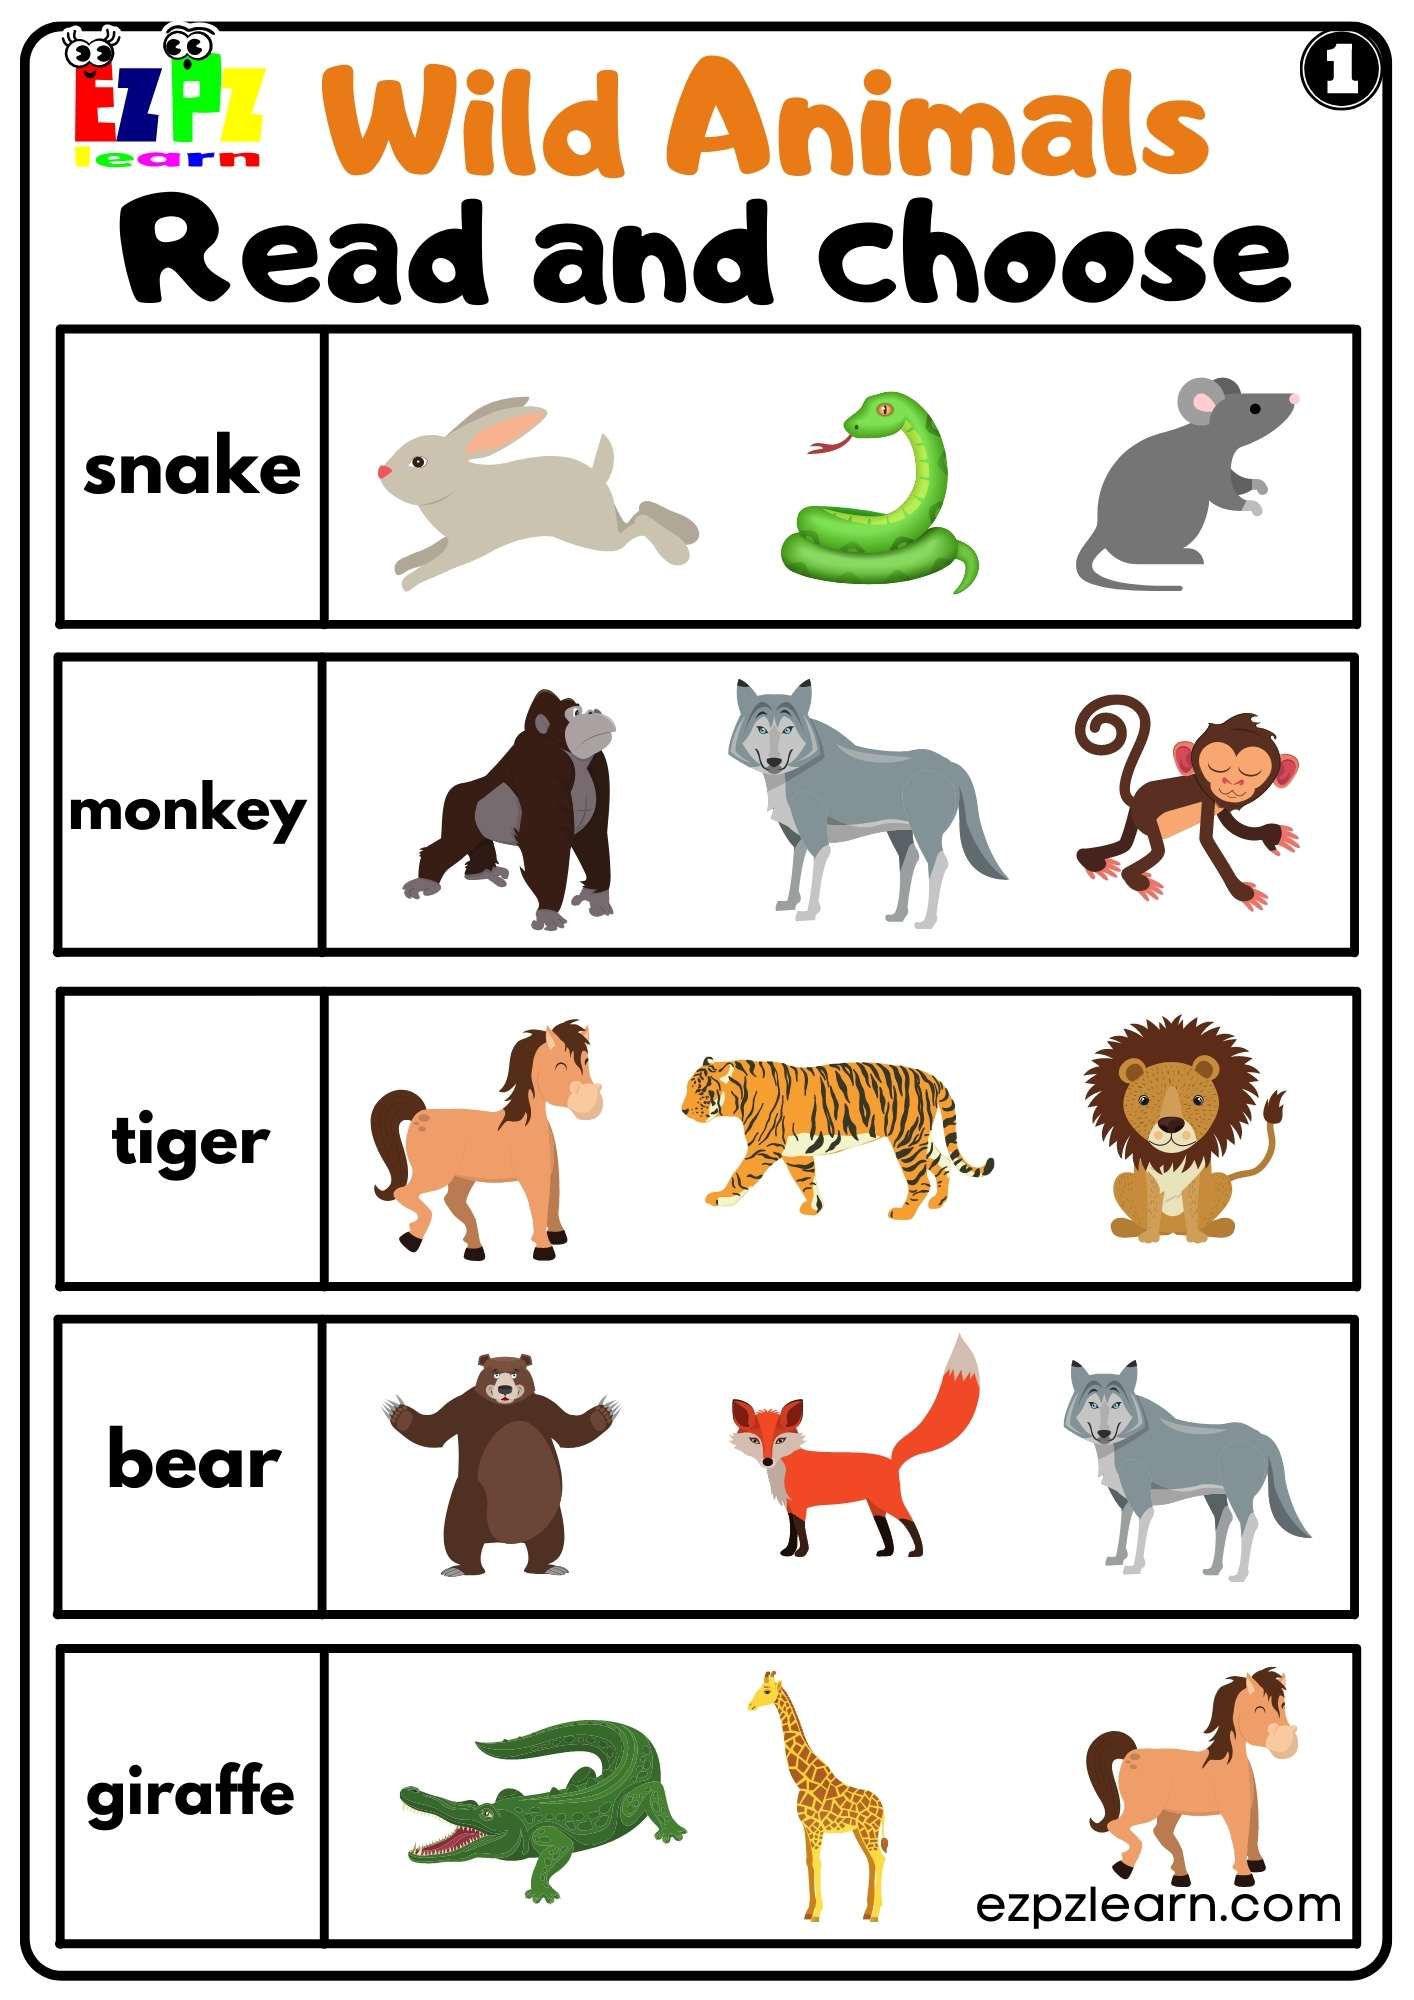 Wild Animals Read and Choose Set 1 For kids and ESL PDF Download -  